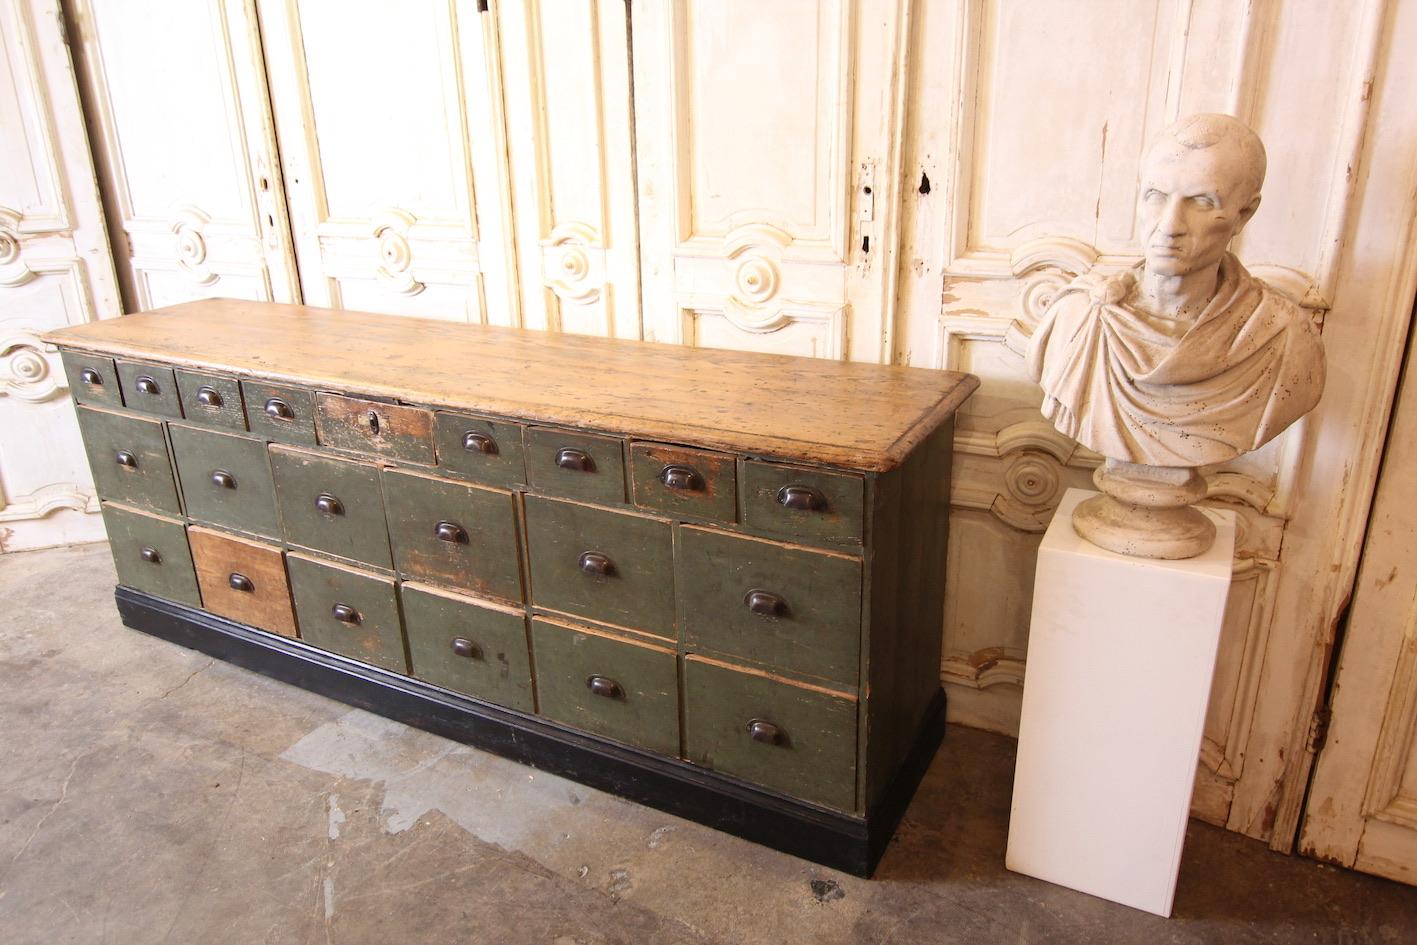 Industrial Early 20th Century German Shop Counter or Bank of Drawers in Original Paint